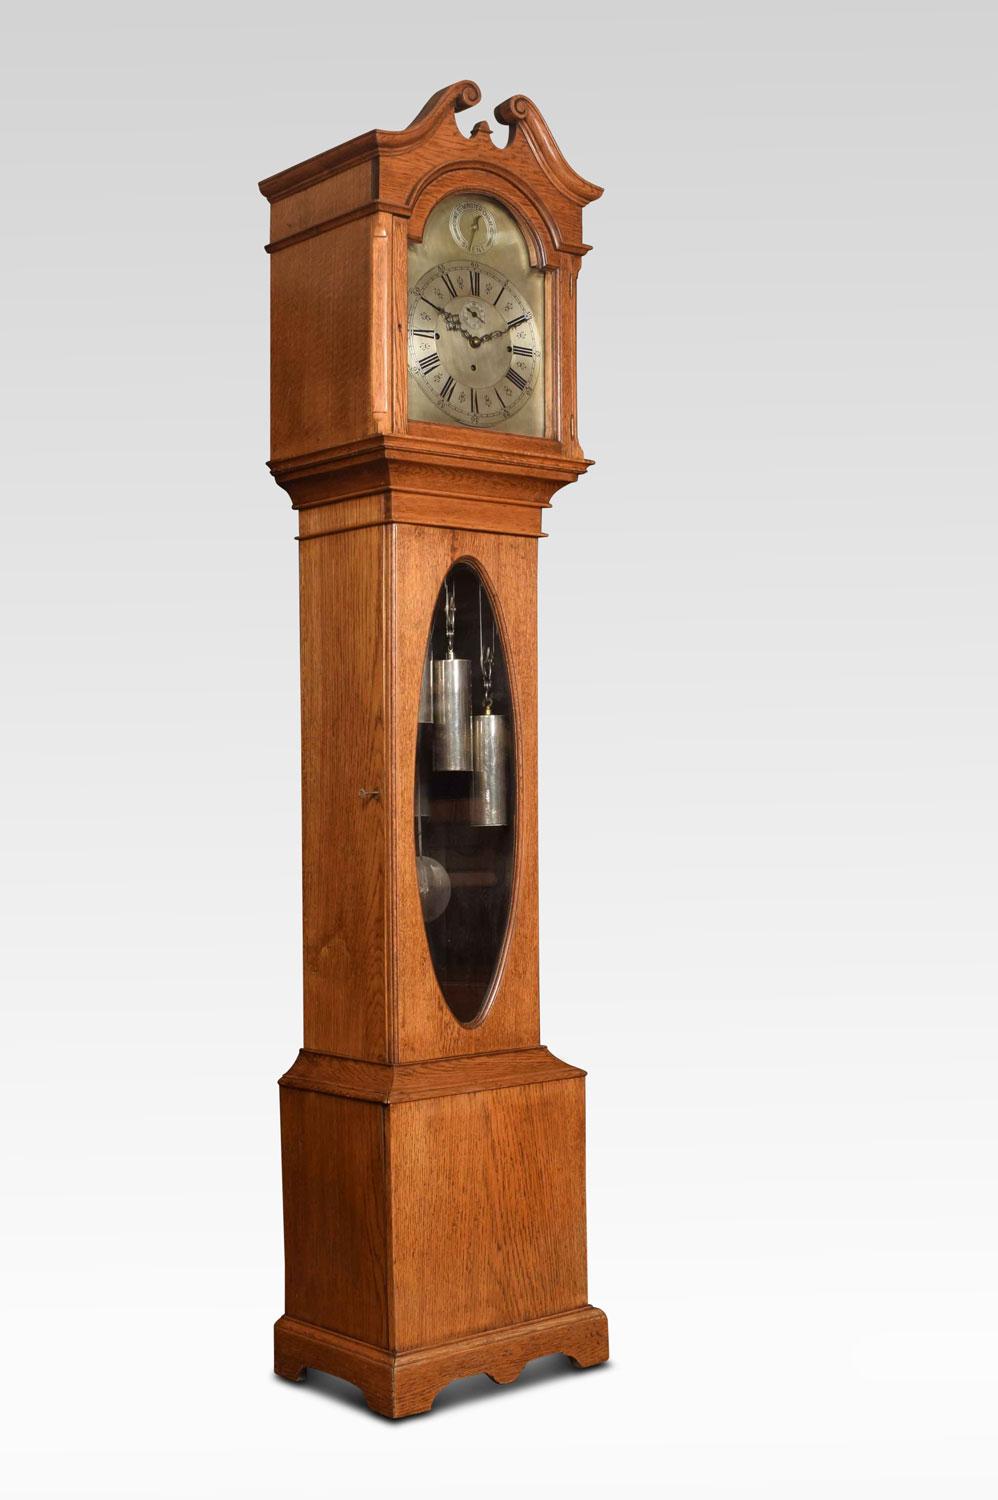 Oak musical and quarter chiming long case clock, having arched silvered dial with Roman numerals, and auxiliary dial having option of Westminster Chimes / Silent. The movement with anchor escapement, striking mechanism with five chiming tubes and